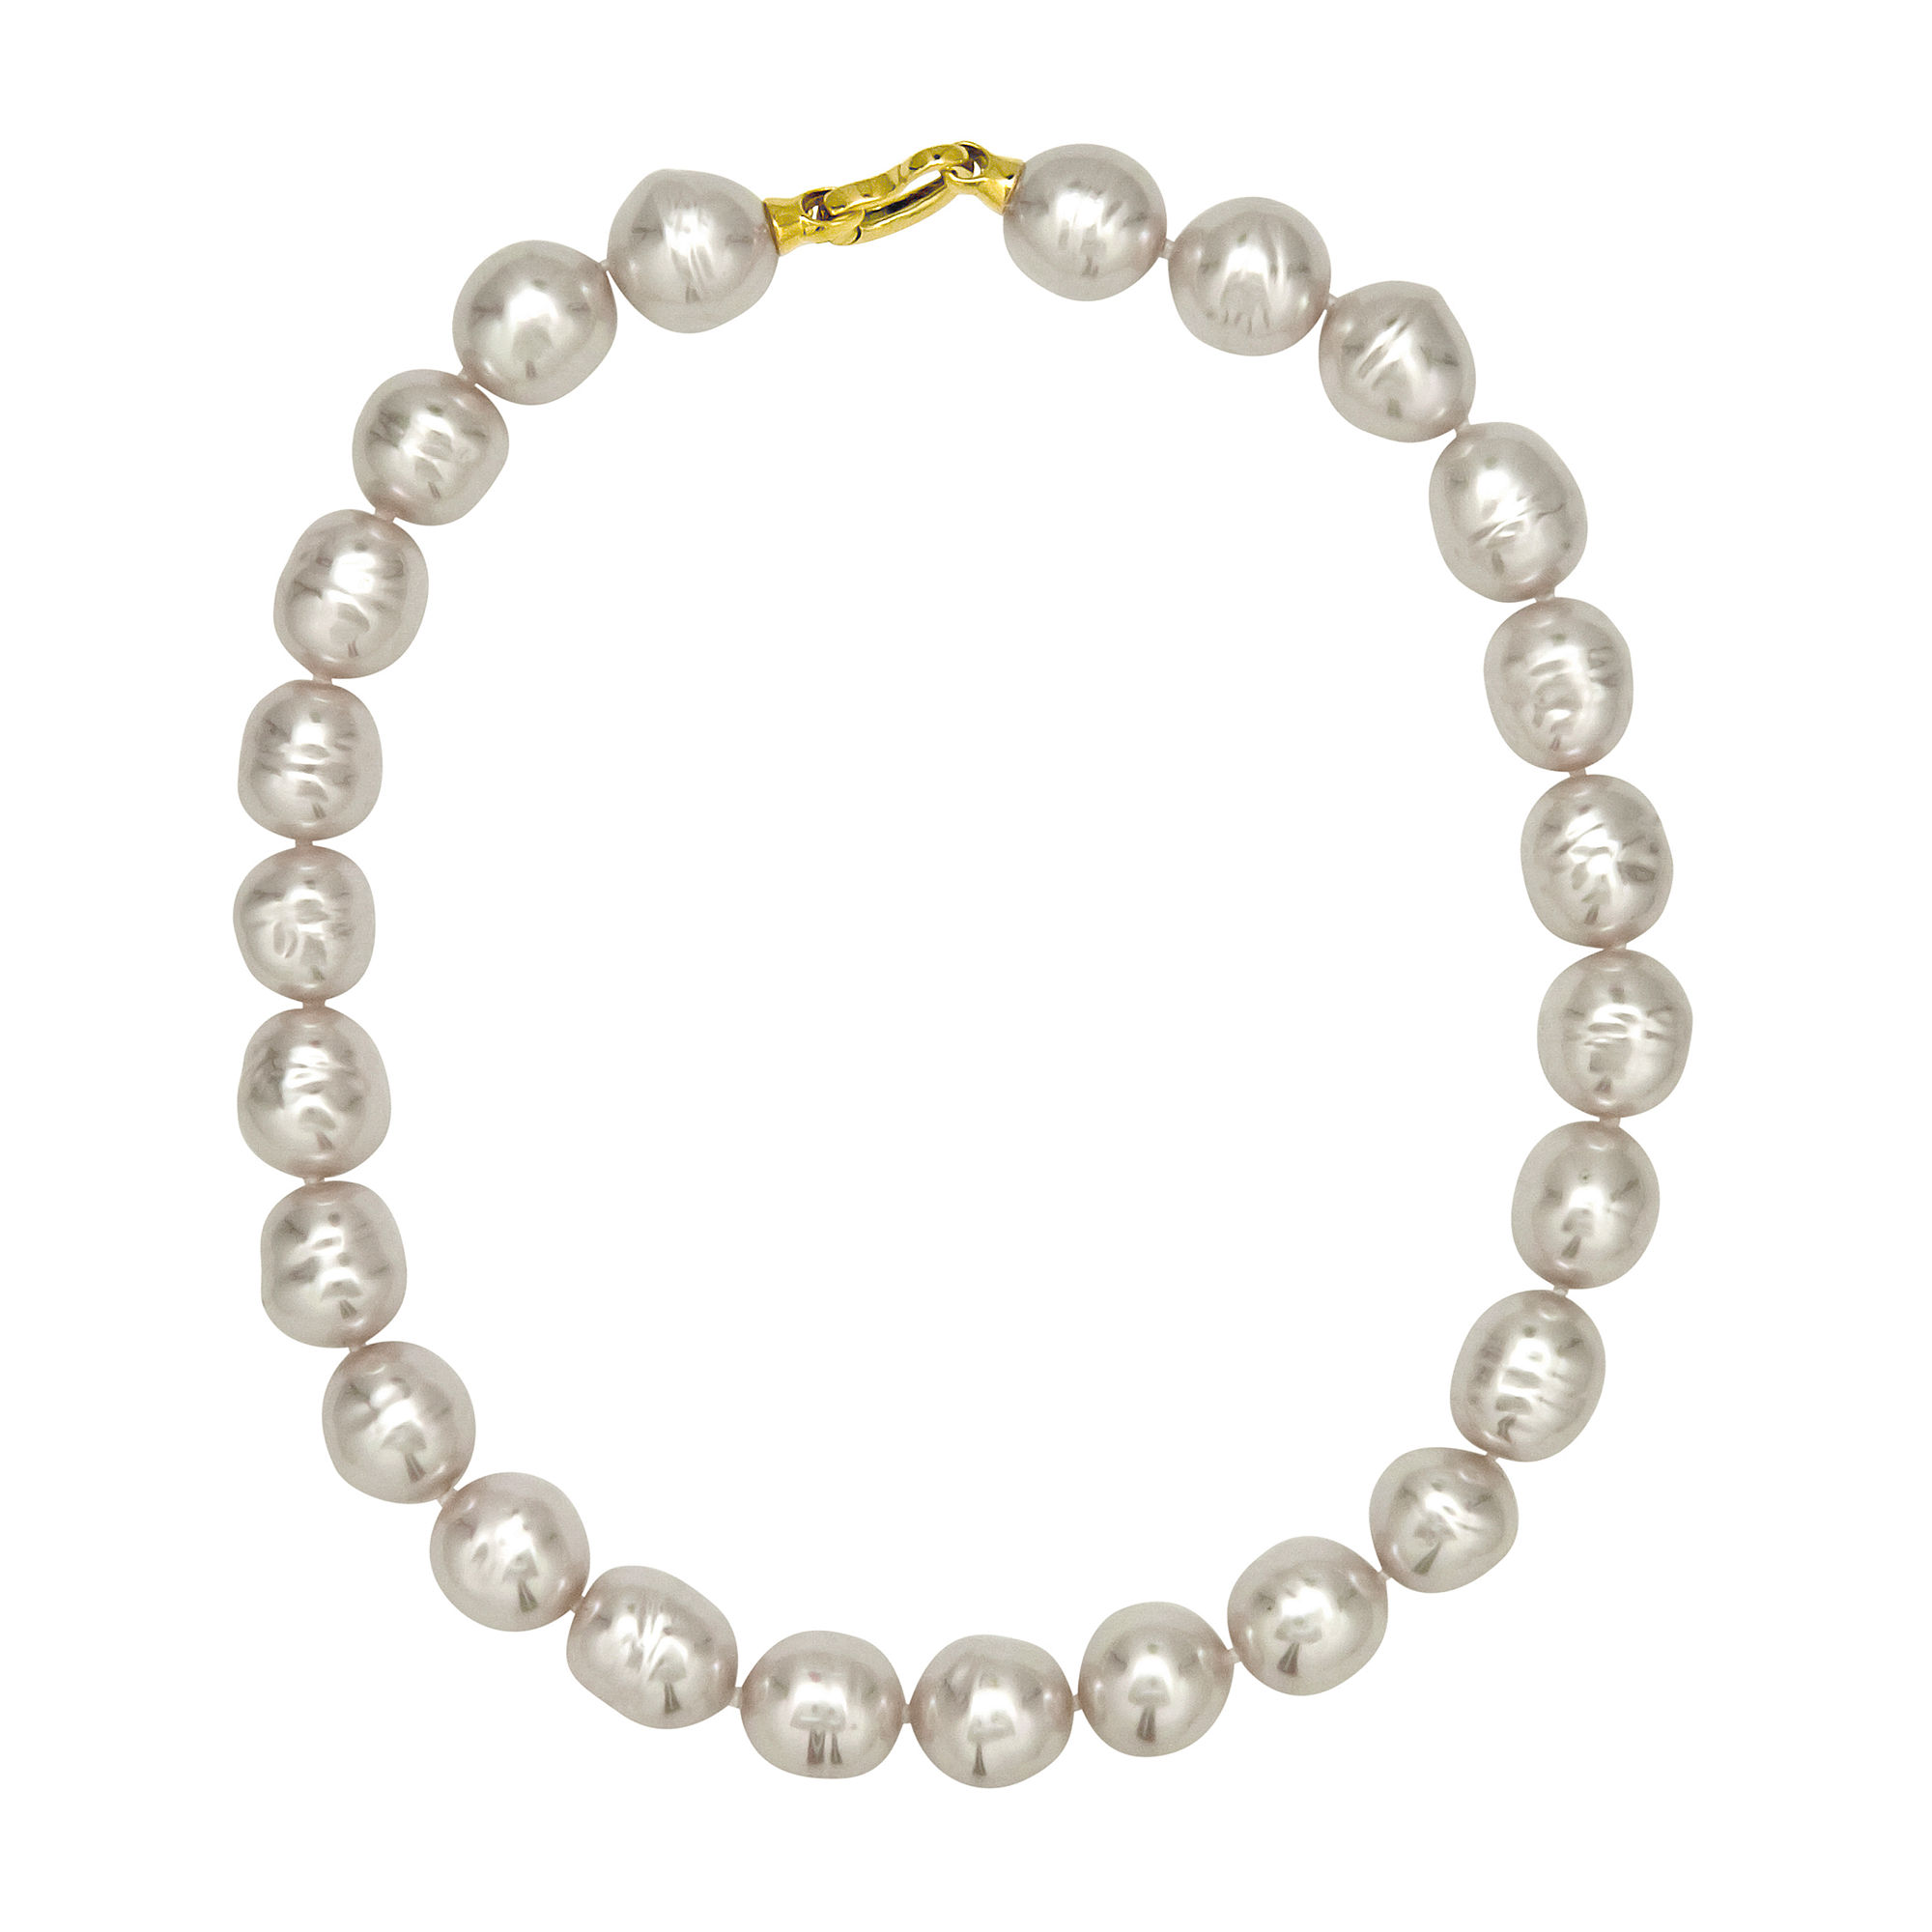 Majorica Women's Silver 925 Pearl Necklace, 40 cm: Buy Online at Best Price  in Egypt - Souq is now Amazon.eg